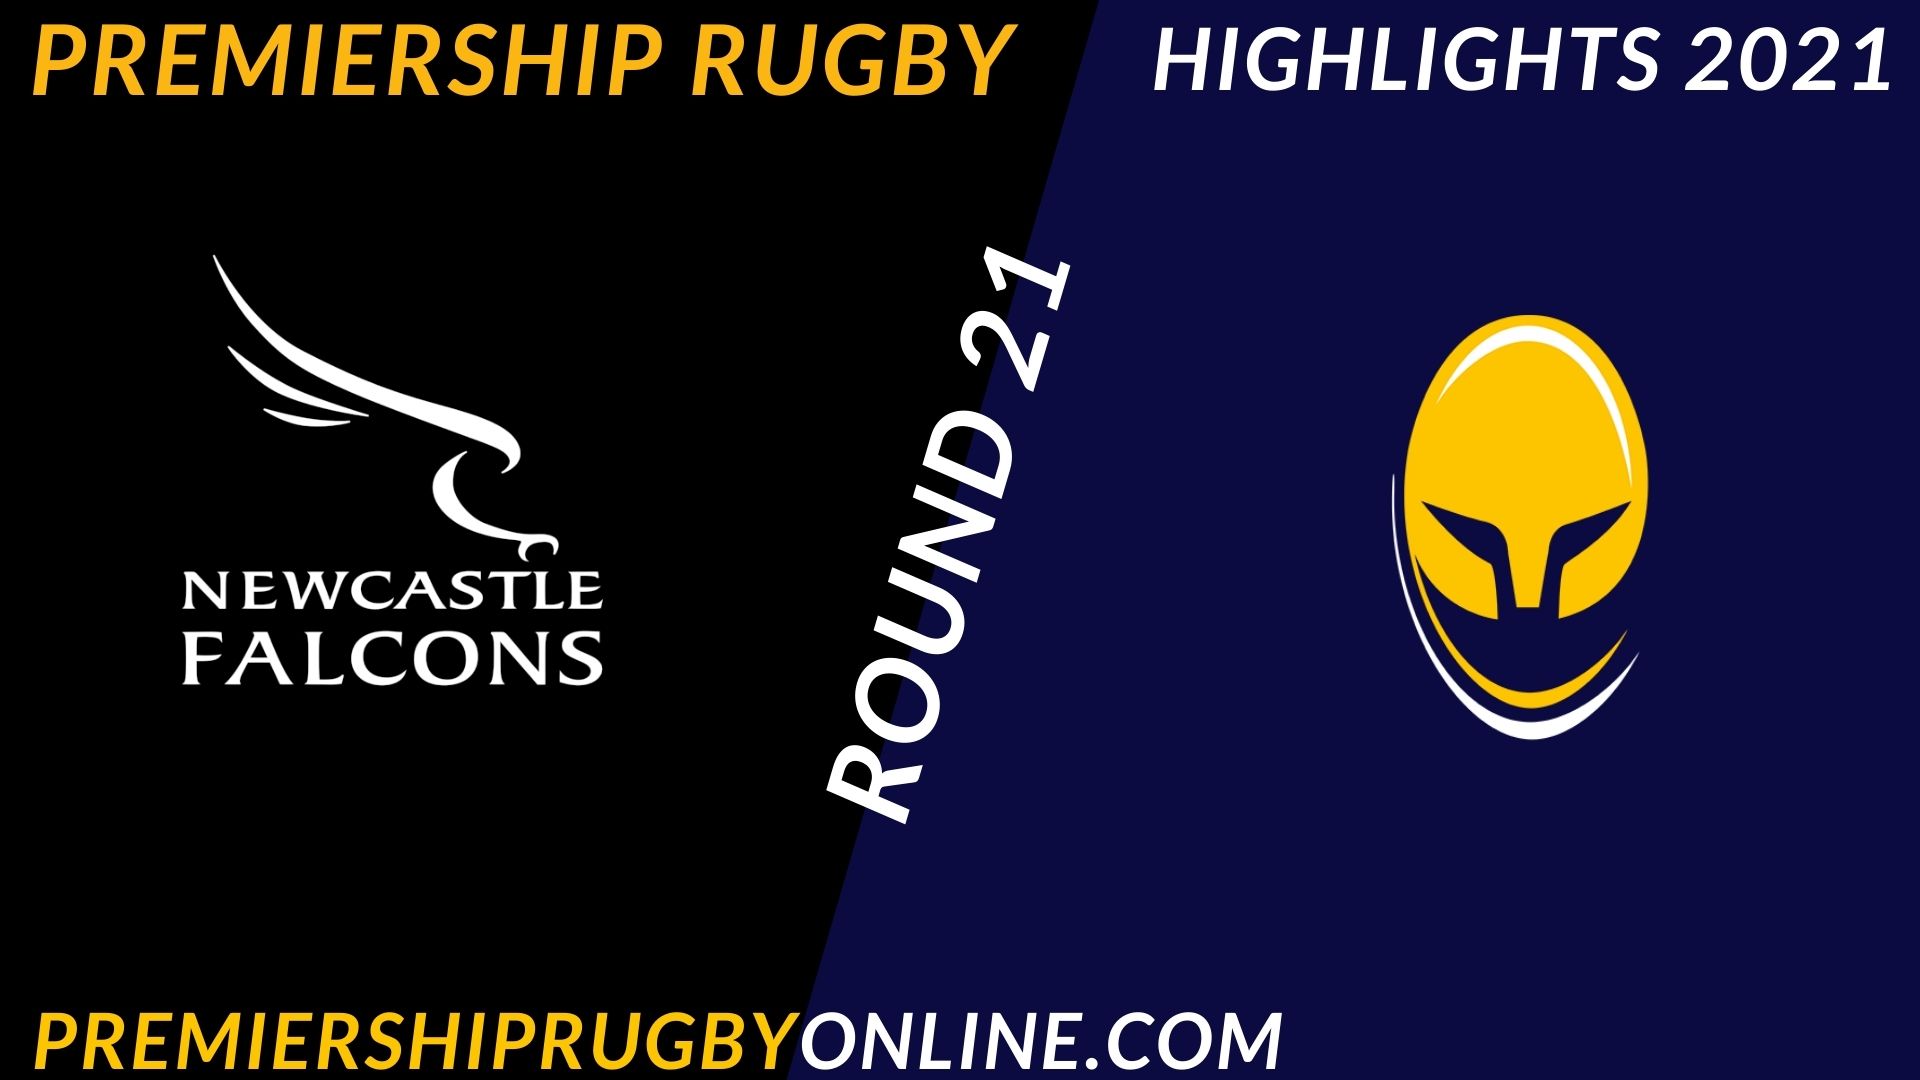 Newcastle Falcons Vs Worcester Warriors Highlights 2021 RD 21